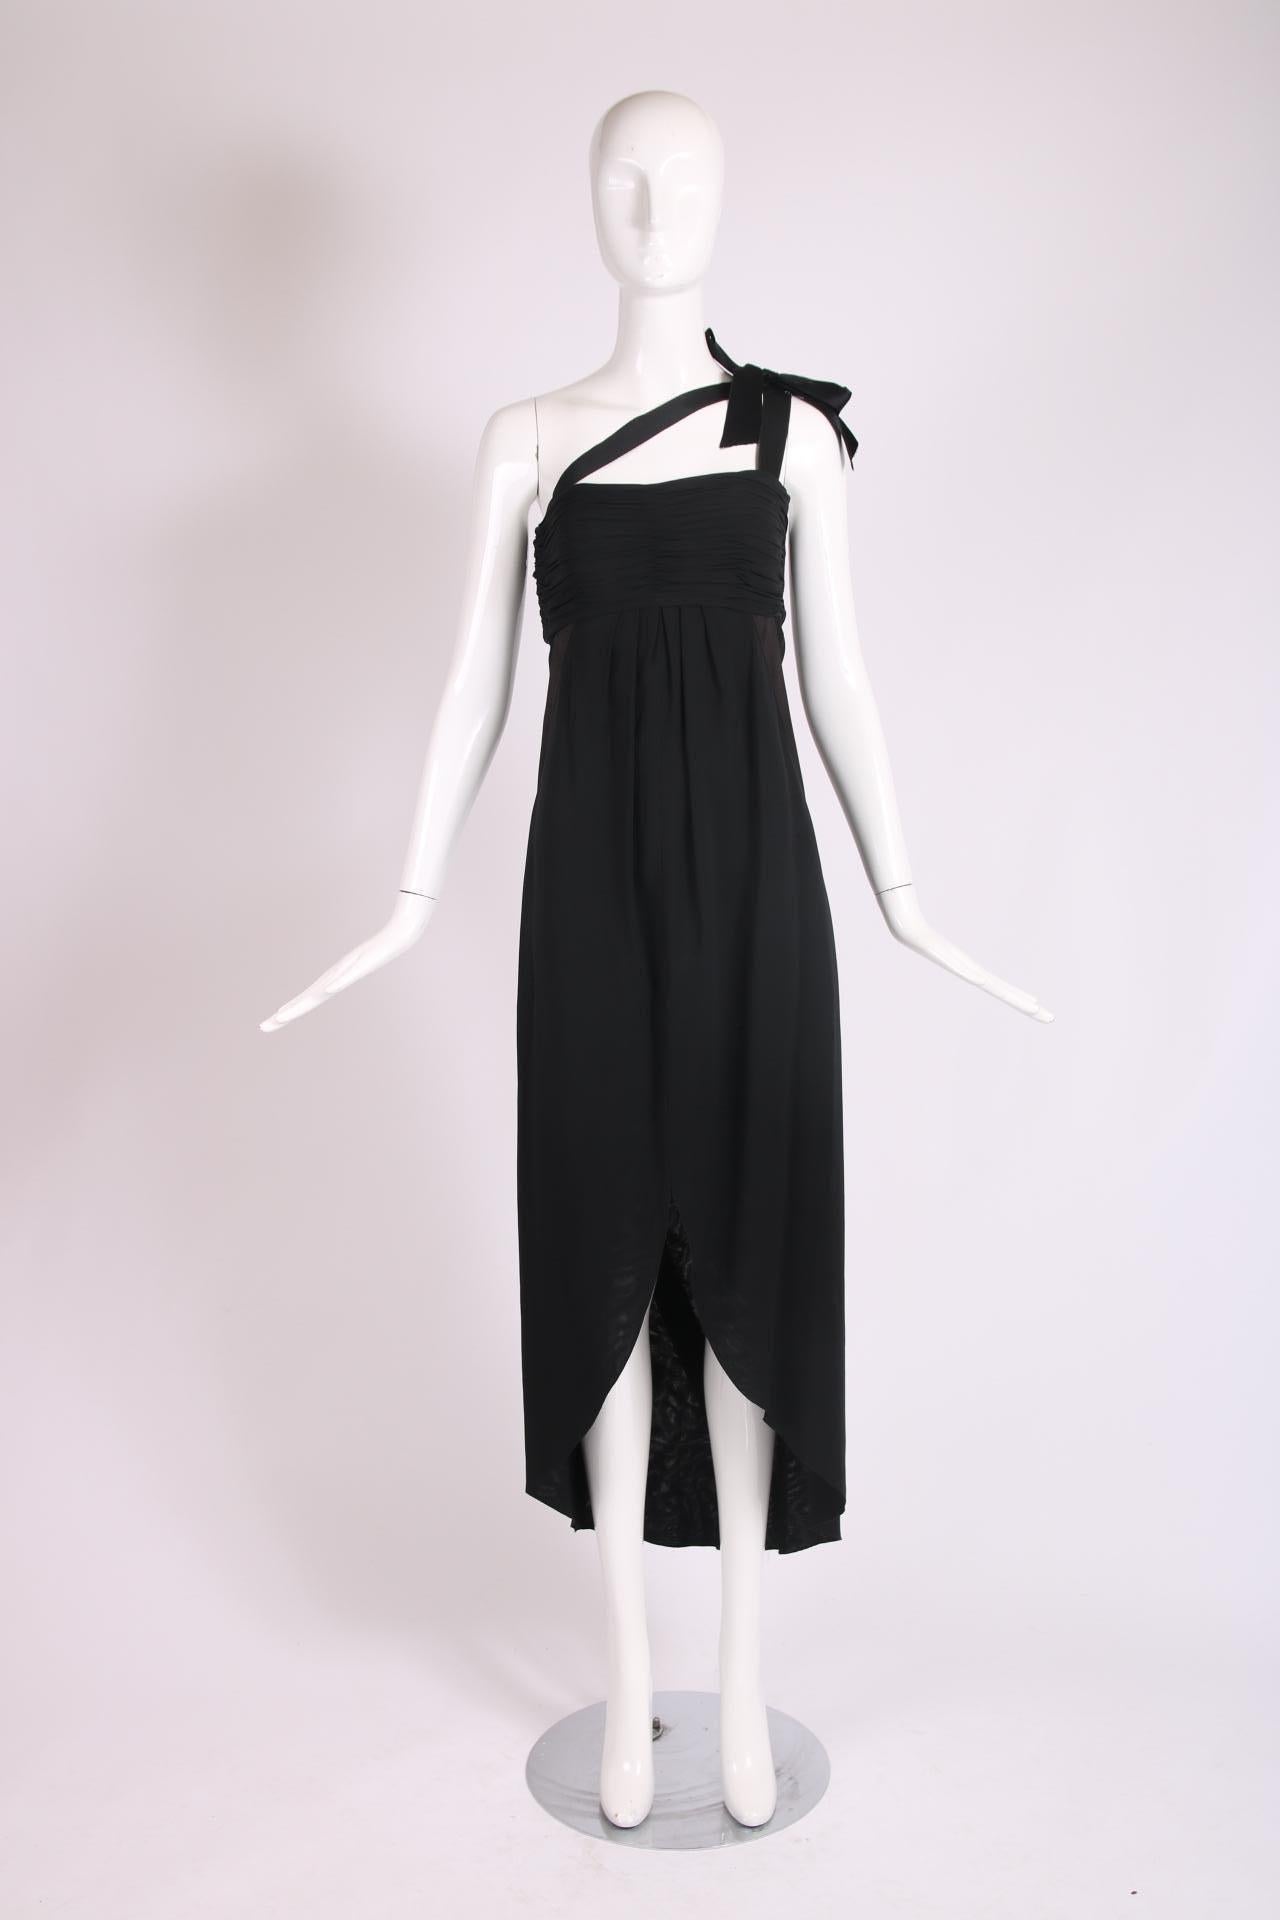 Vintage Chanel black silk strapless gown with satin bow at shoulder, ruching at the bust, a single shoulder constructed from black satin ribbon which also serves as a design motif at the skirt front and back. Labeled, 